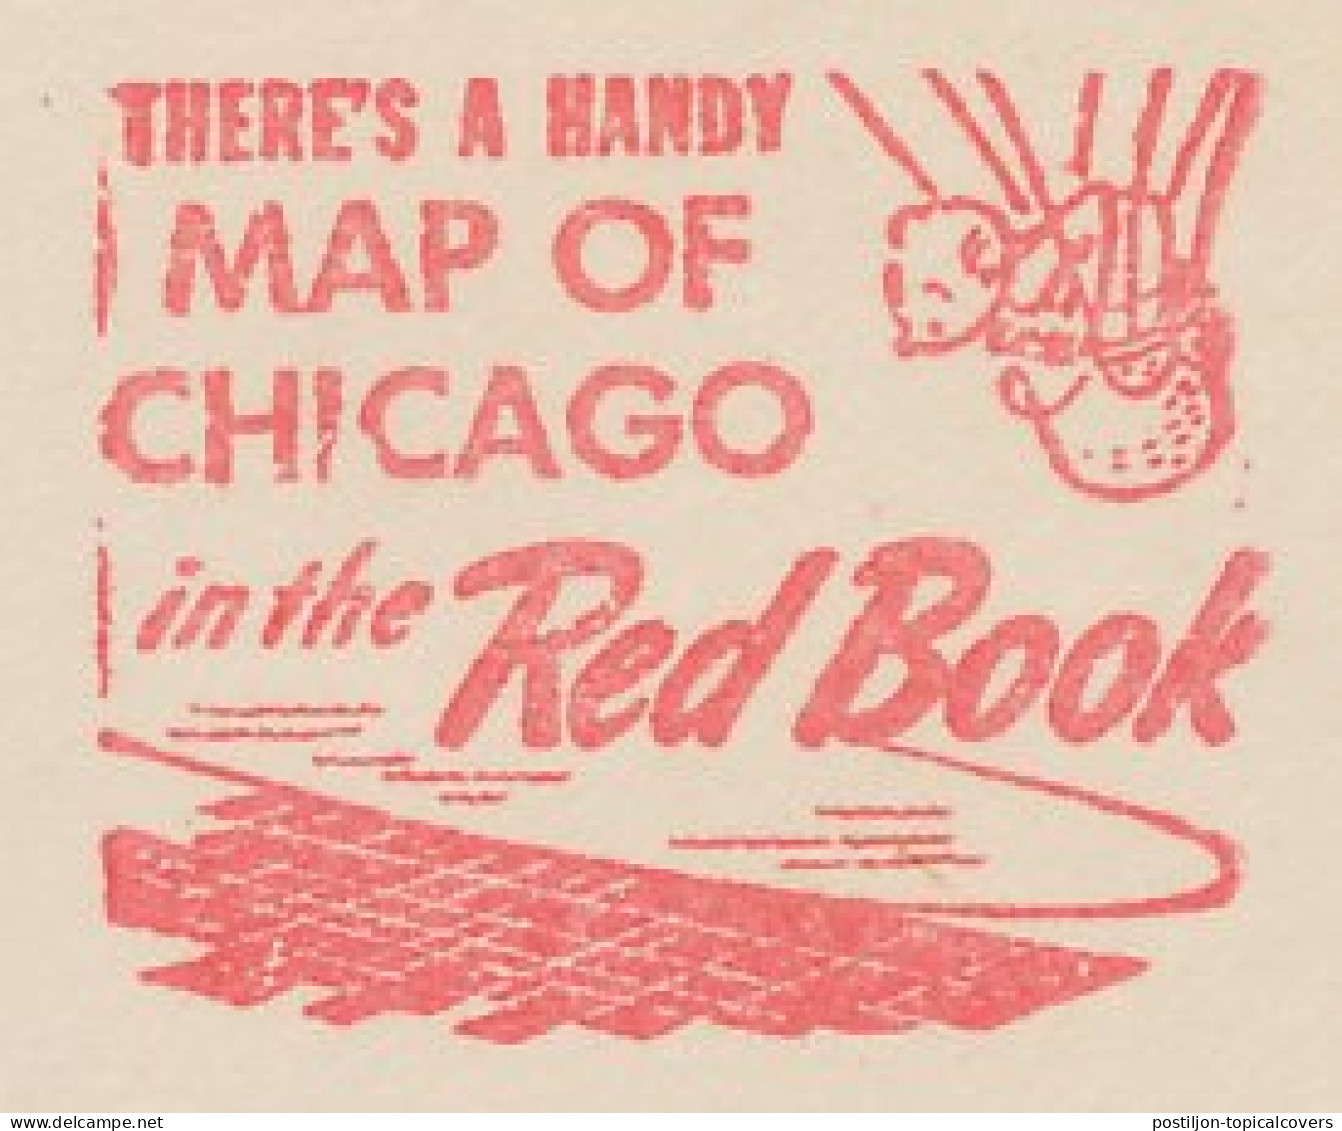 Meter Top Cut USA 1942 Chicago - Red Book - Balloonist - Geography